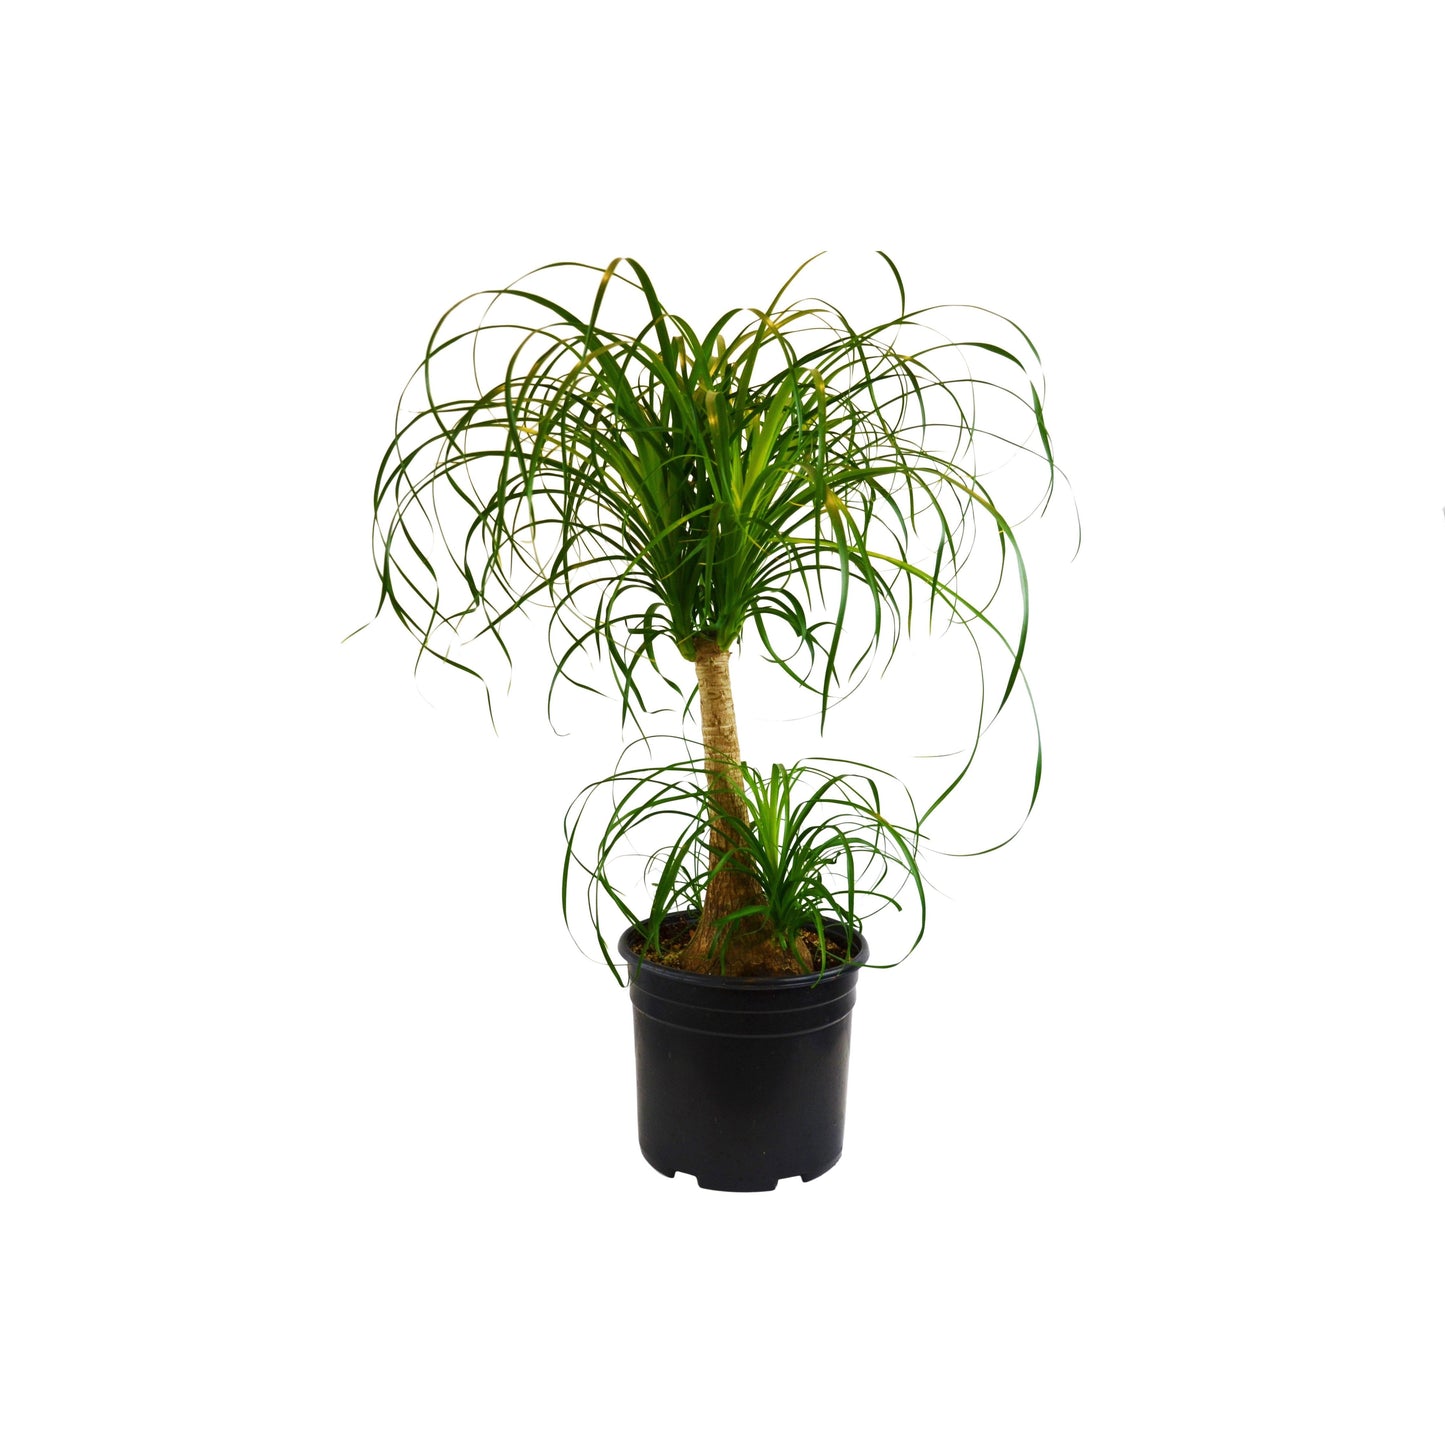 Palm 'Ponytail' - In 10" Pot